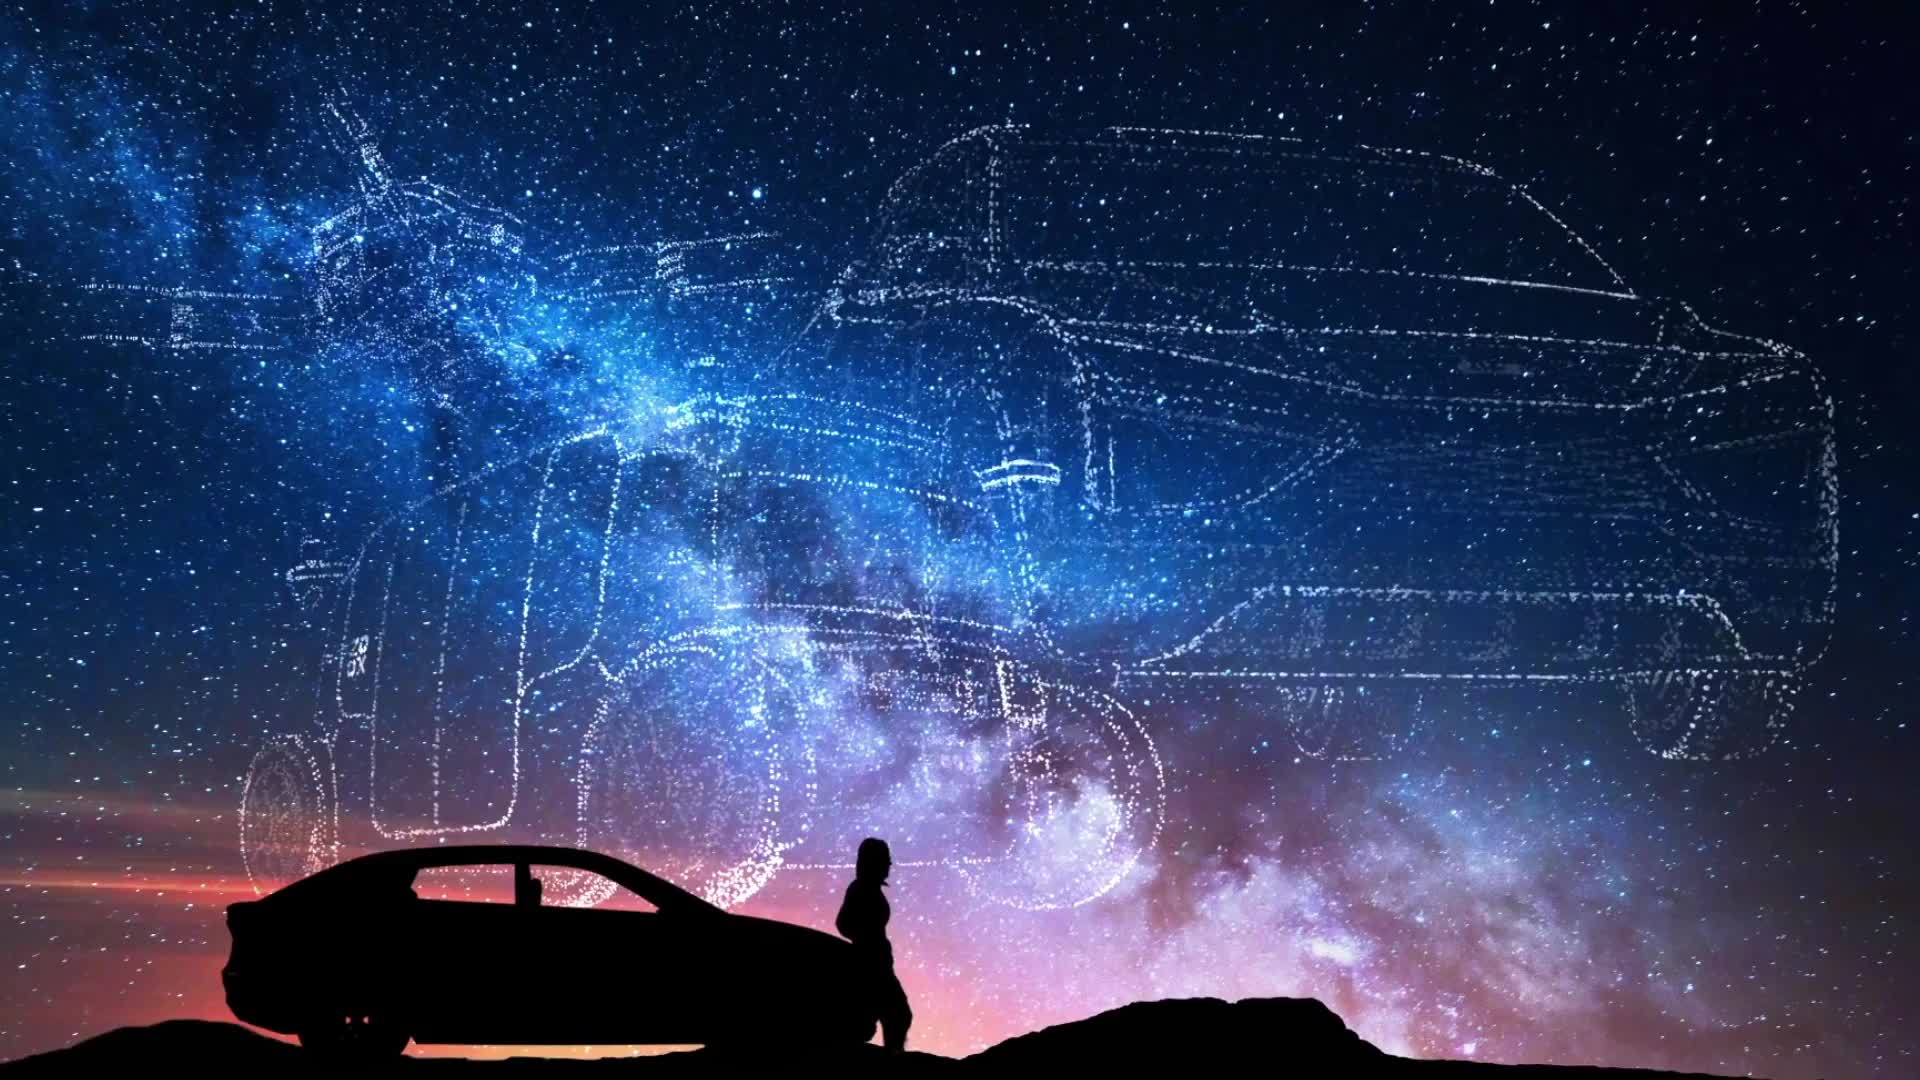 Silhouette of a person and a car with a purple sunset an constellations in the background of vehicles